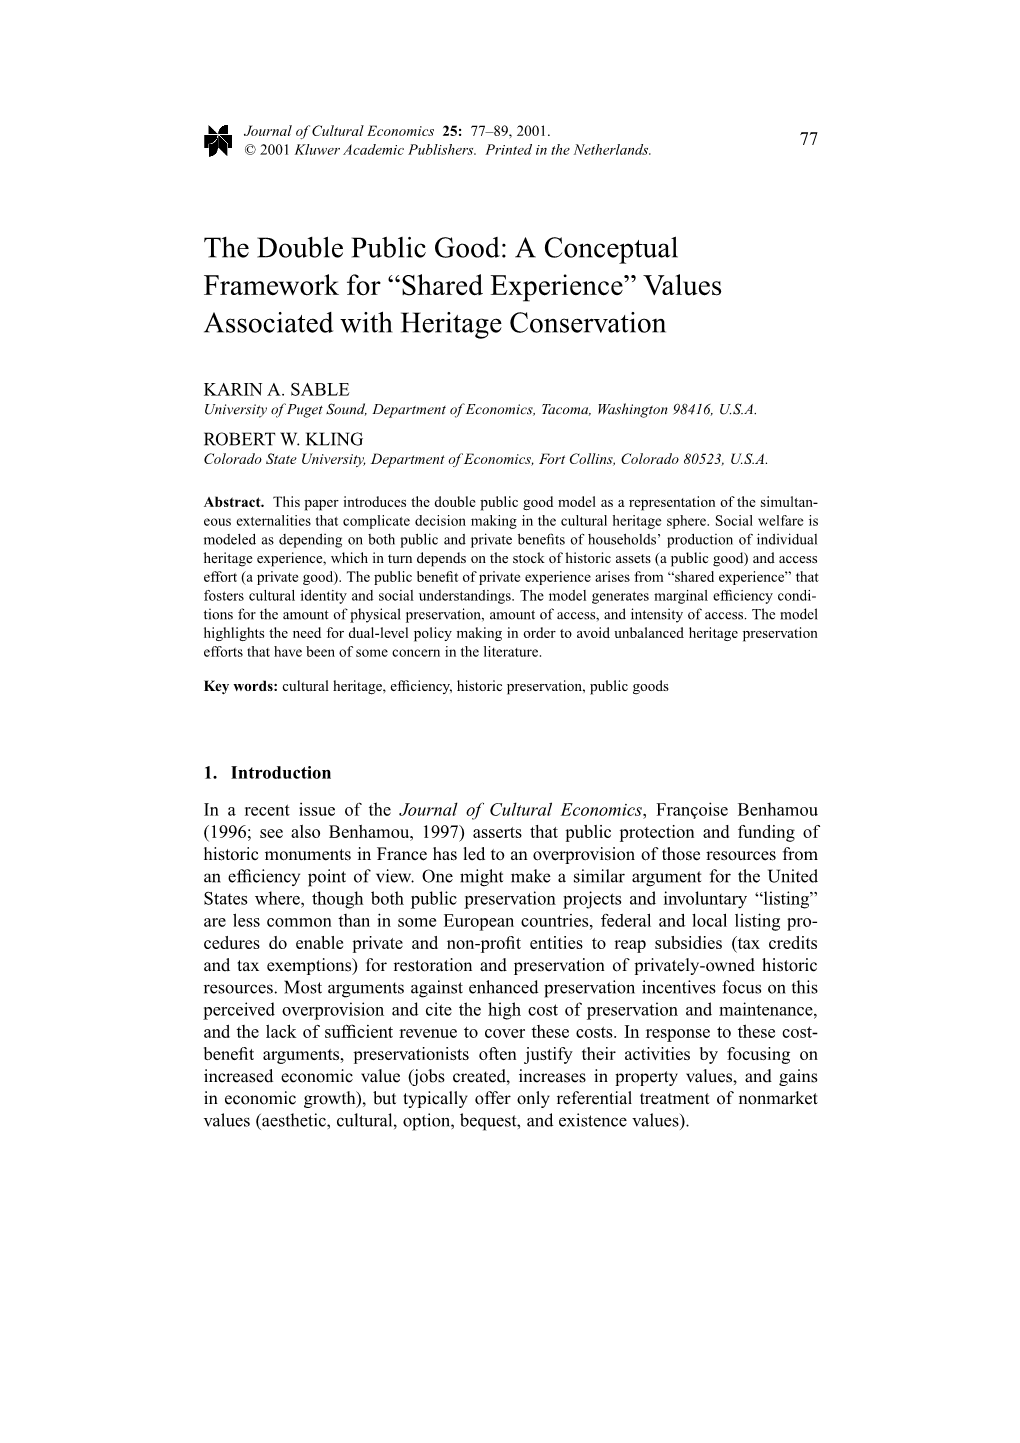 The Double Public Good: a Conceptual Framework for ``Shared